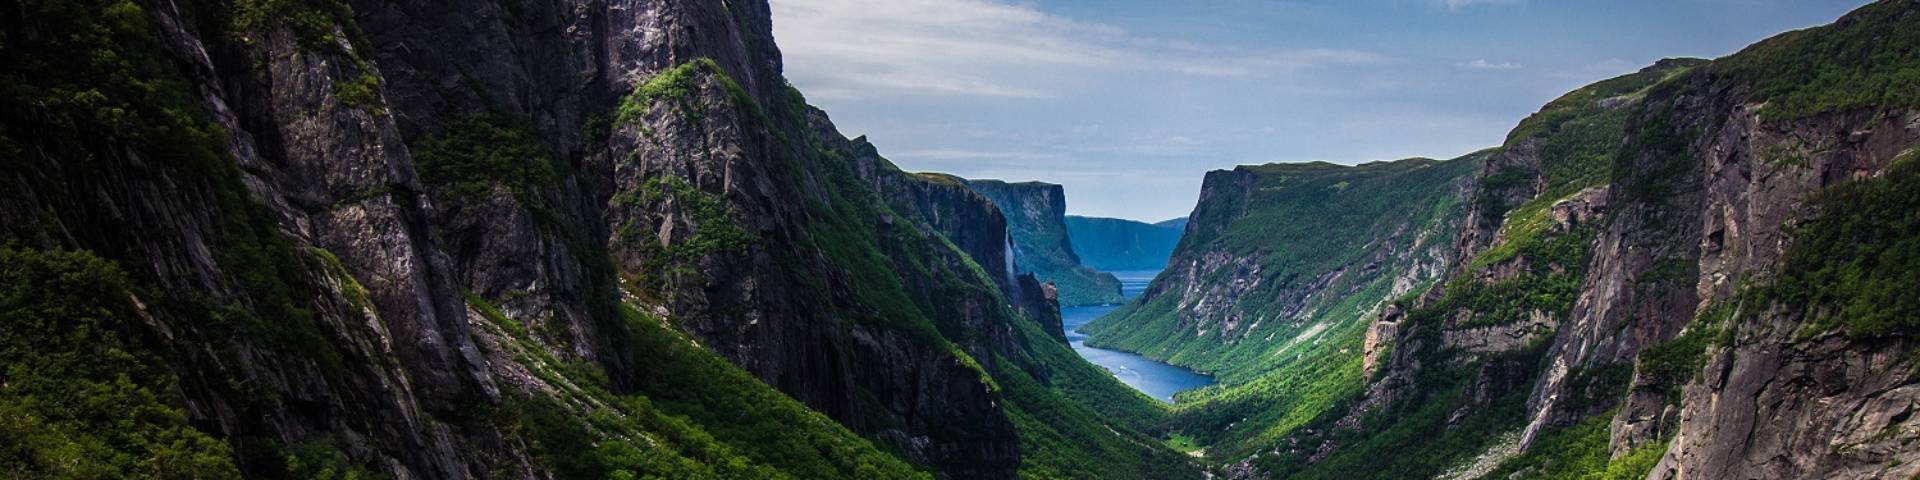 Tall cliffs rise on either side of the gorge at Western Brook Pond in Gros Morne National Park